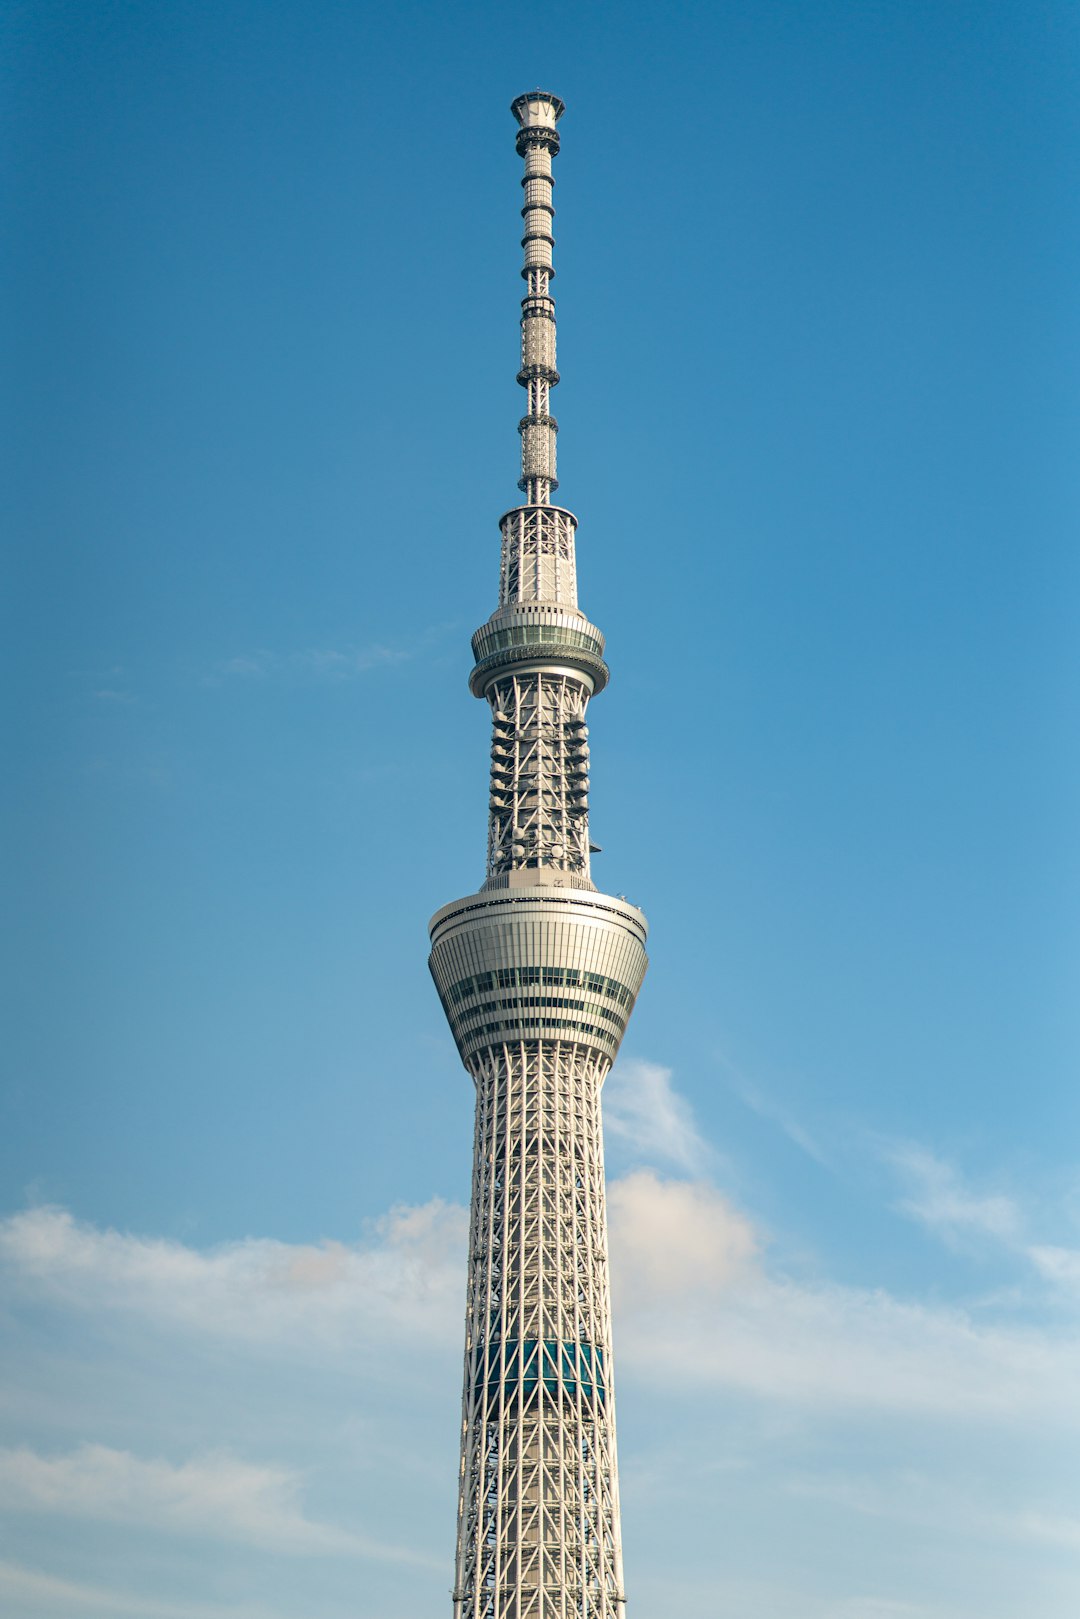 Travel Tips and Stories of Tokyo Skytree in Japan